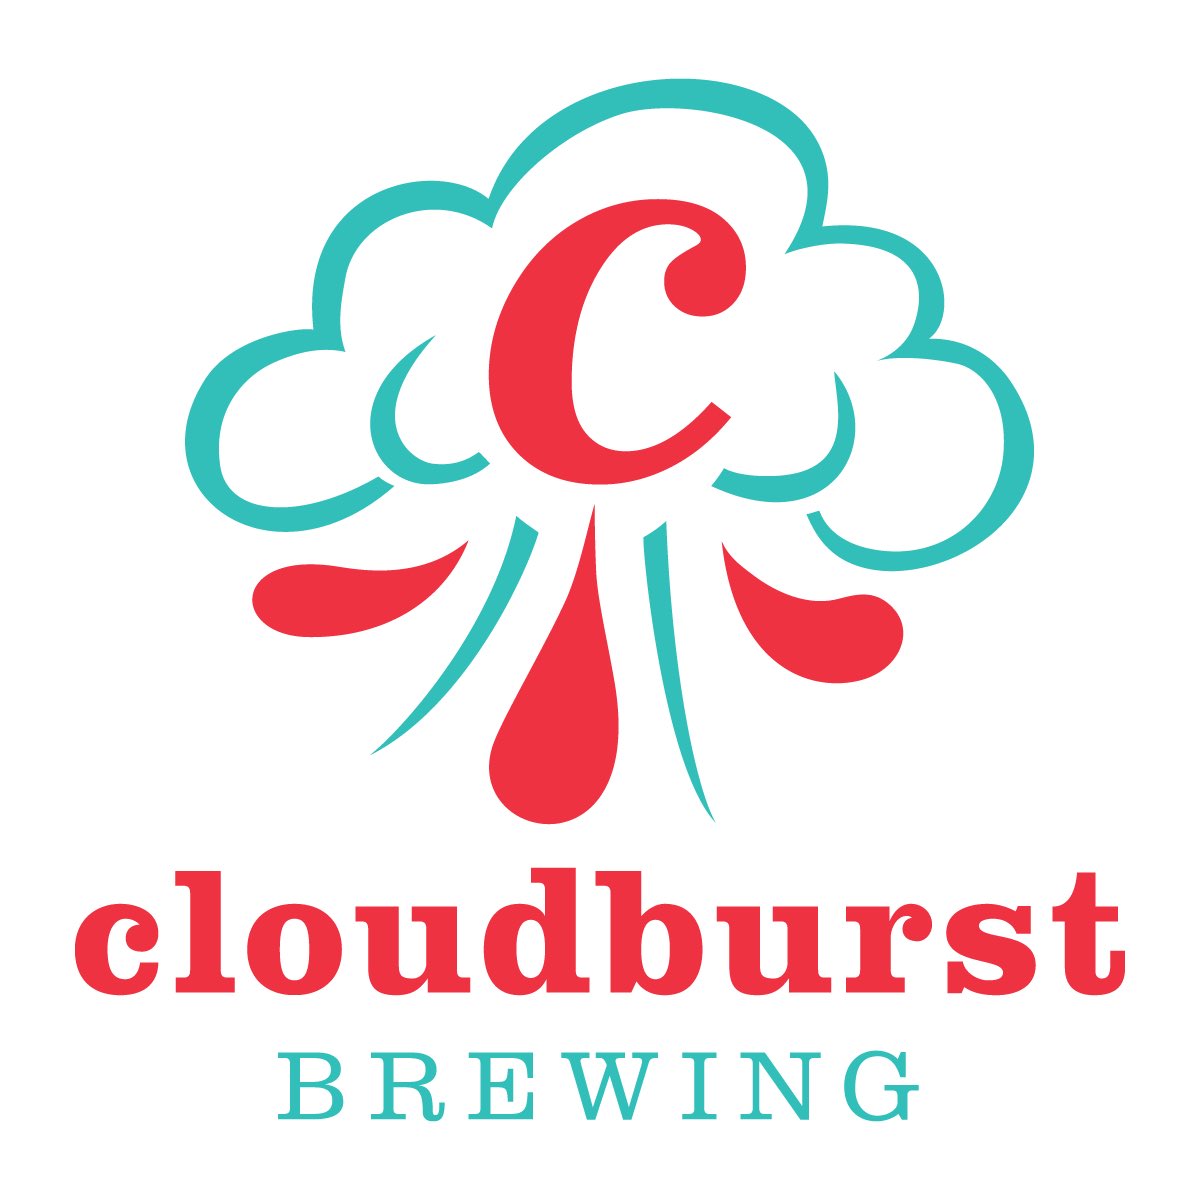 Join Rat City’s All Stars for a pint night @Cloudburst_Brew (5456 Shilshole Ave NW) on Wednesday, April 3, from 5:30-9 p.m. Rat City will get a portion of the proceeds from designated taps that will help us fund our travel program. Come hang out with us and drink beer!